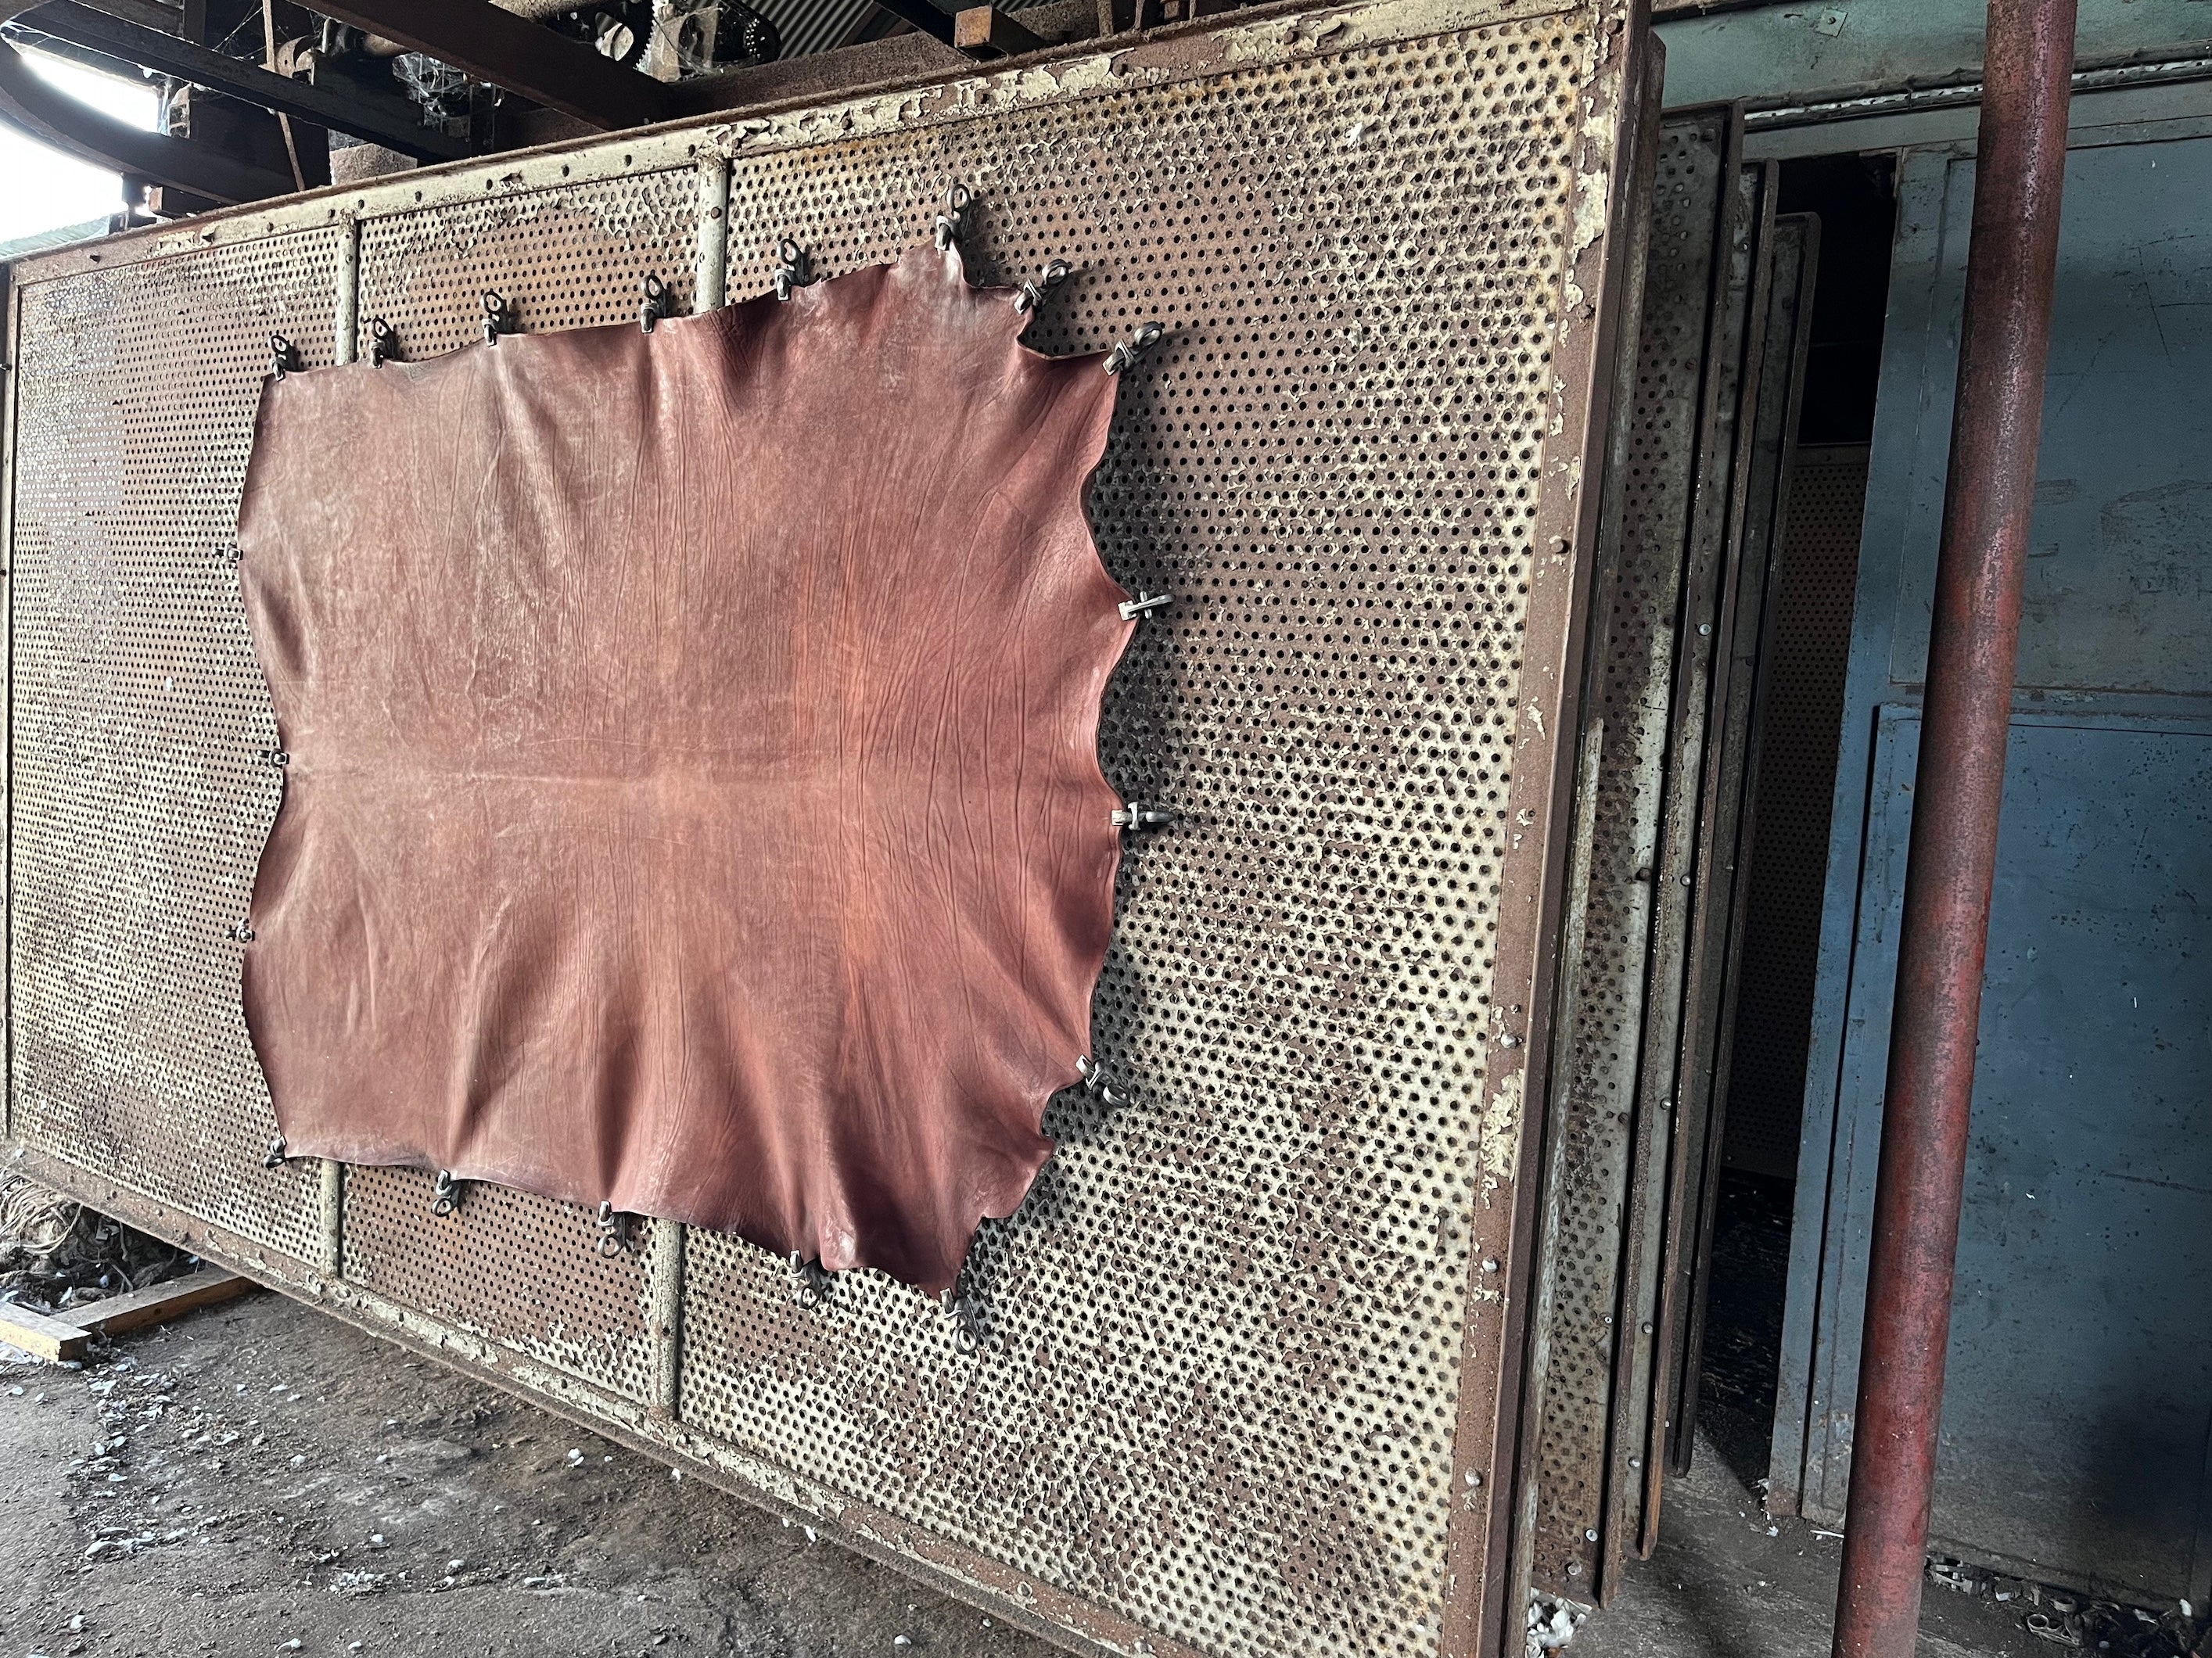 Treated leather hides at tannery